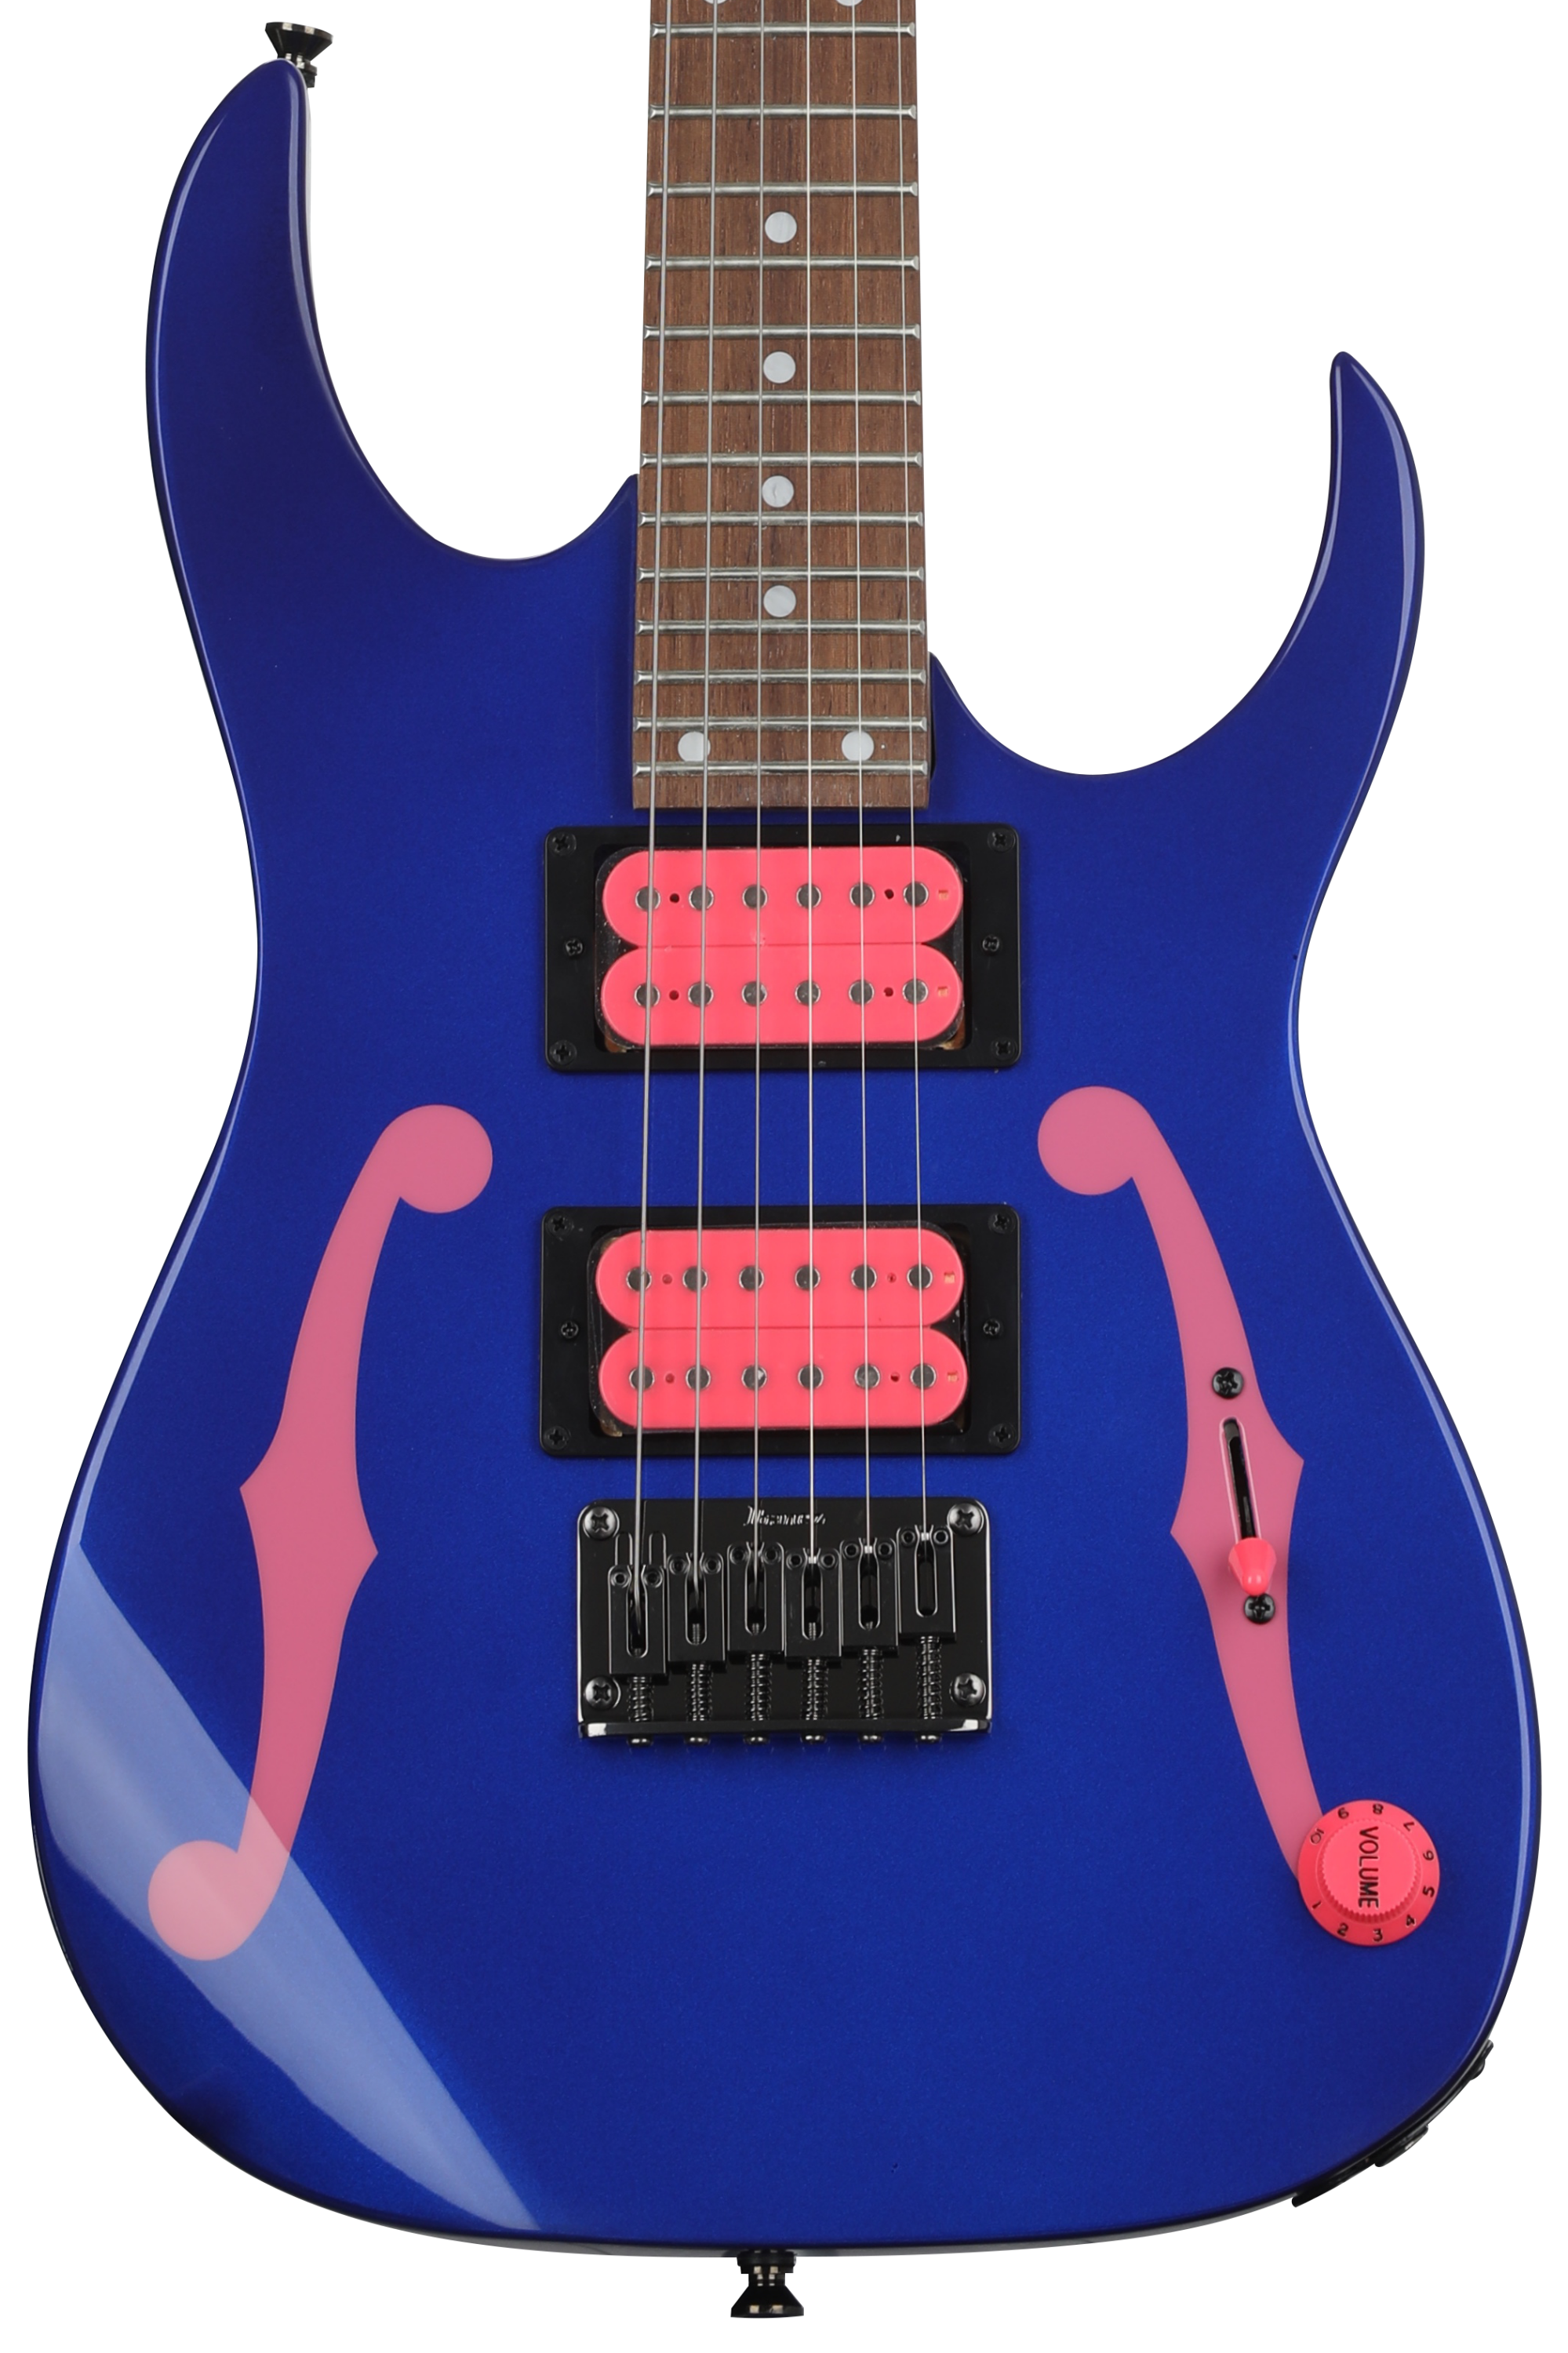 6 strings 3 colors (also looks great in navy edges with light pink